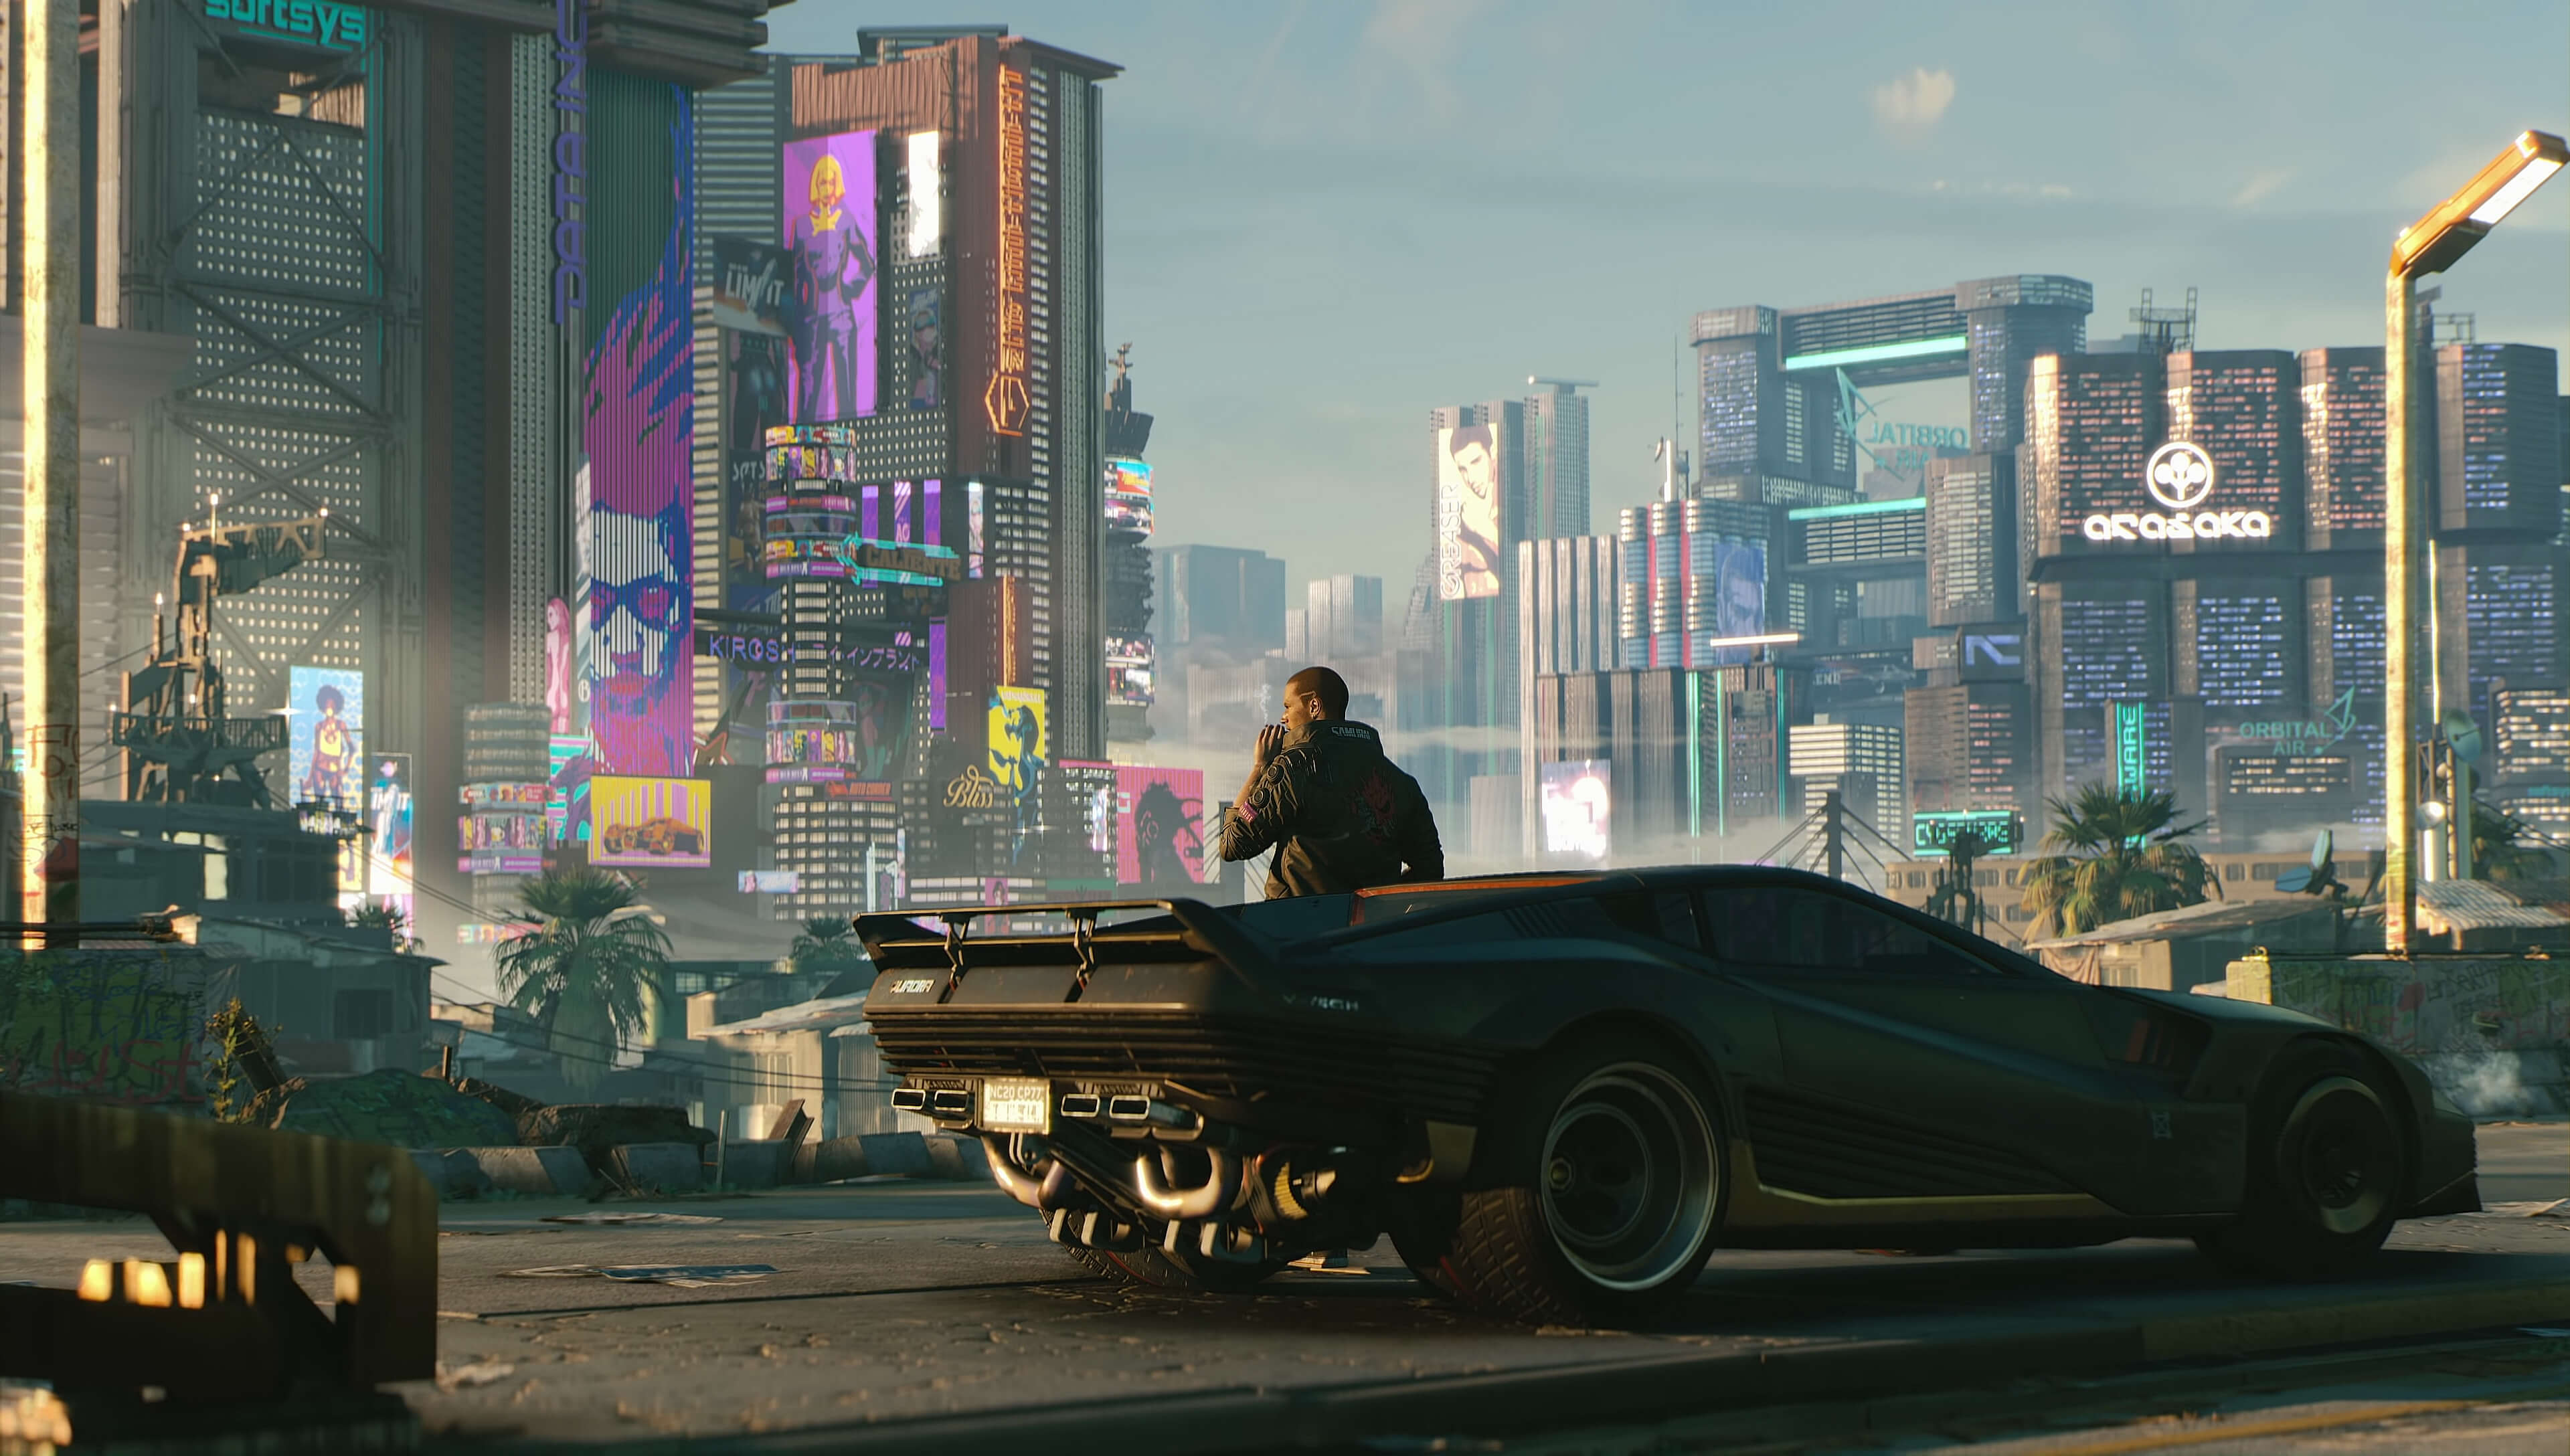 Cyberpunk 2077 previewed at Gamescom, and the game sounds awesome